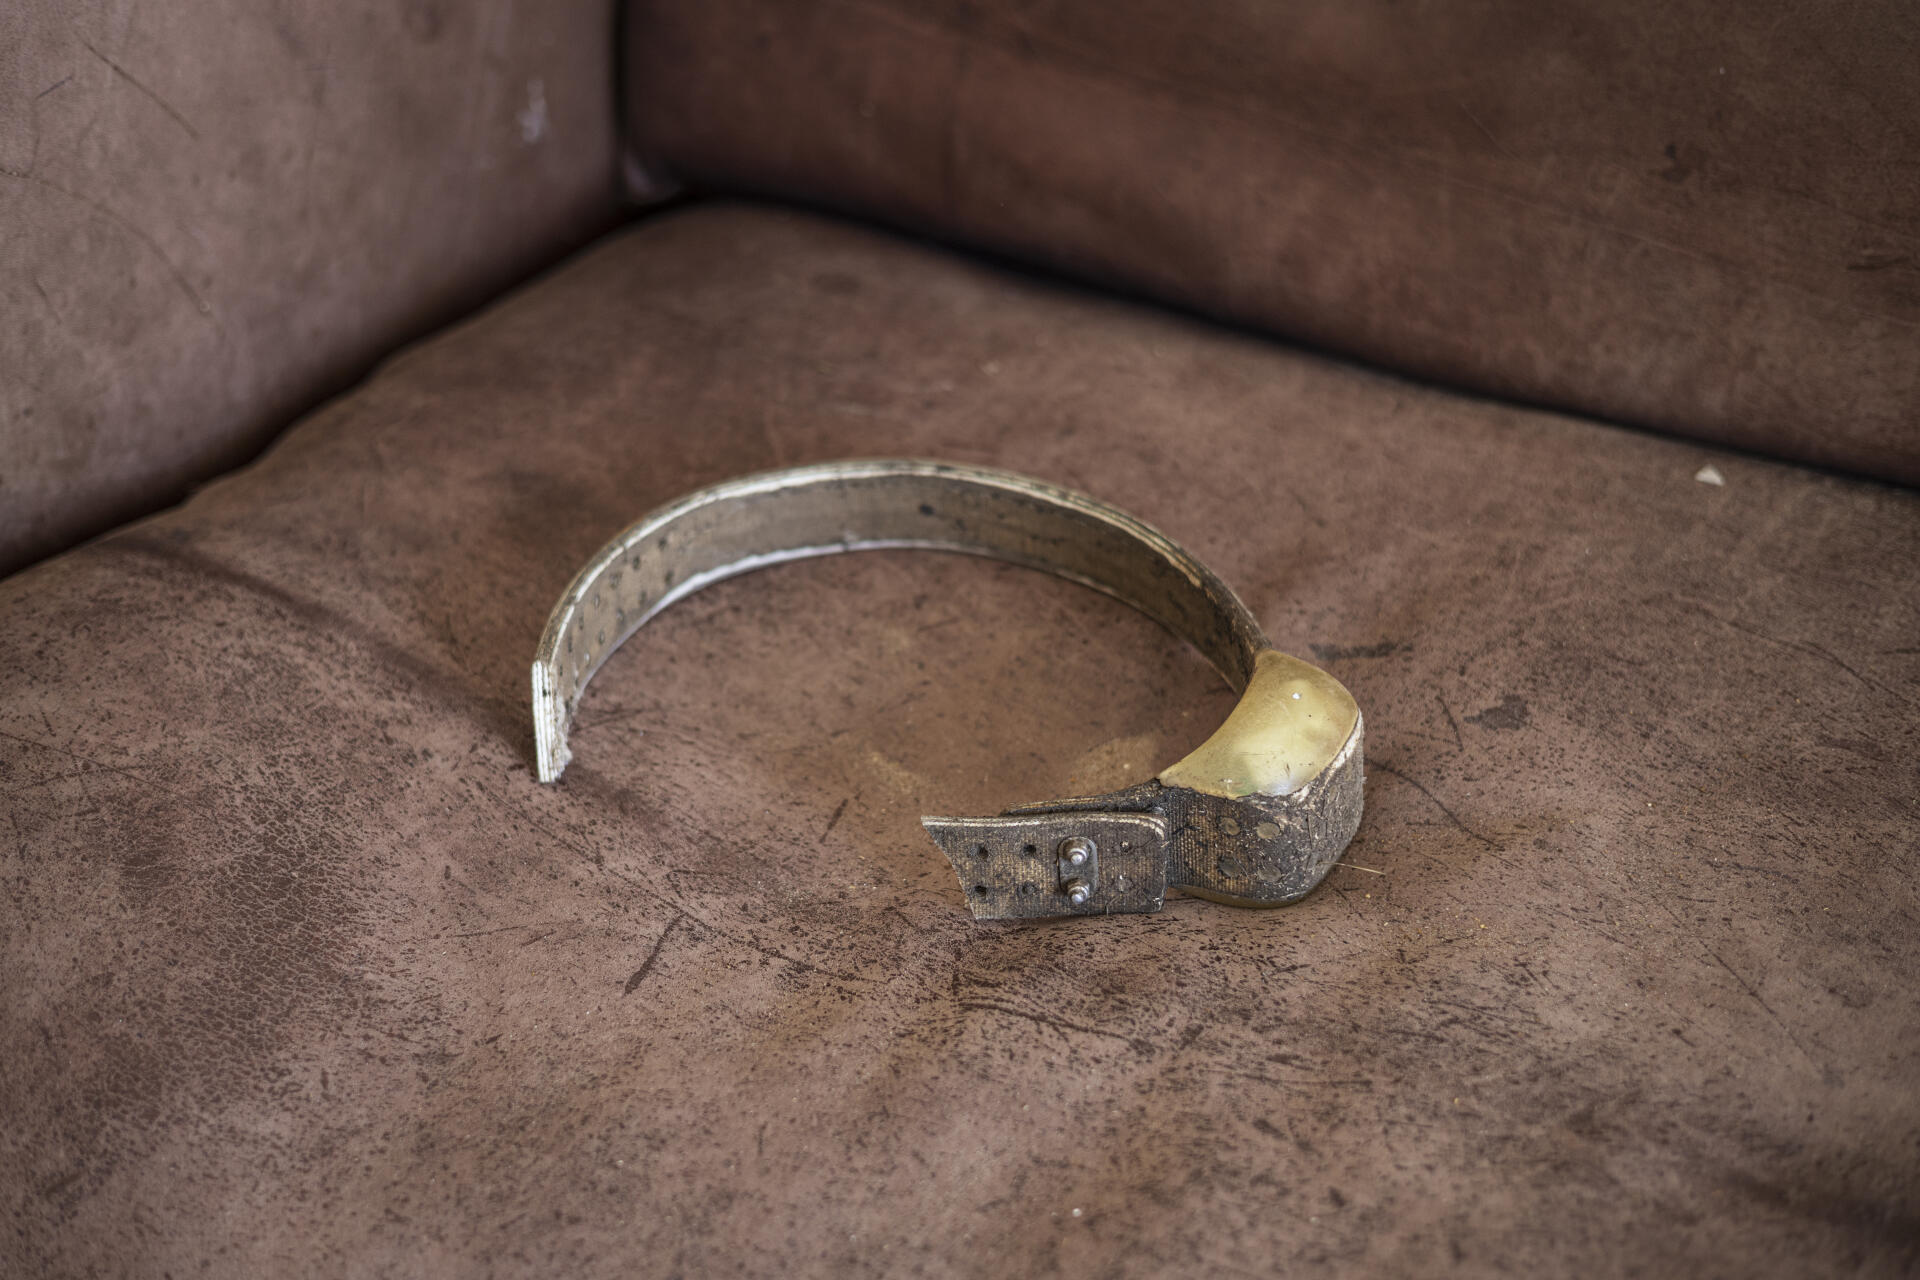 The anklet of a rhino killed by poachers the previous week, on a couch at the anti-poaching unit headquarters in Lalibela reserve outside Makhanda on April 7, 2023.